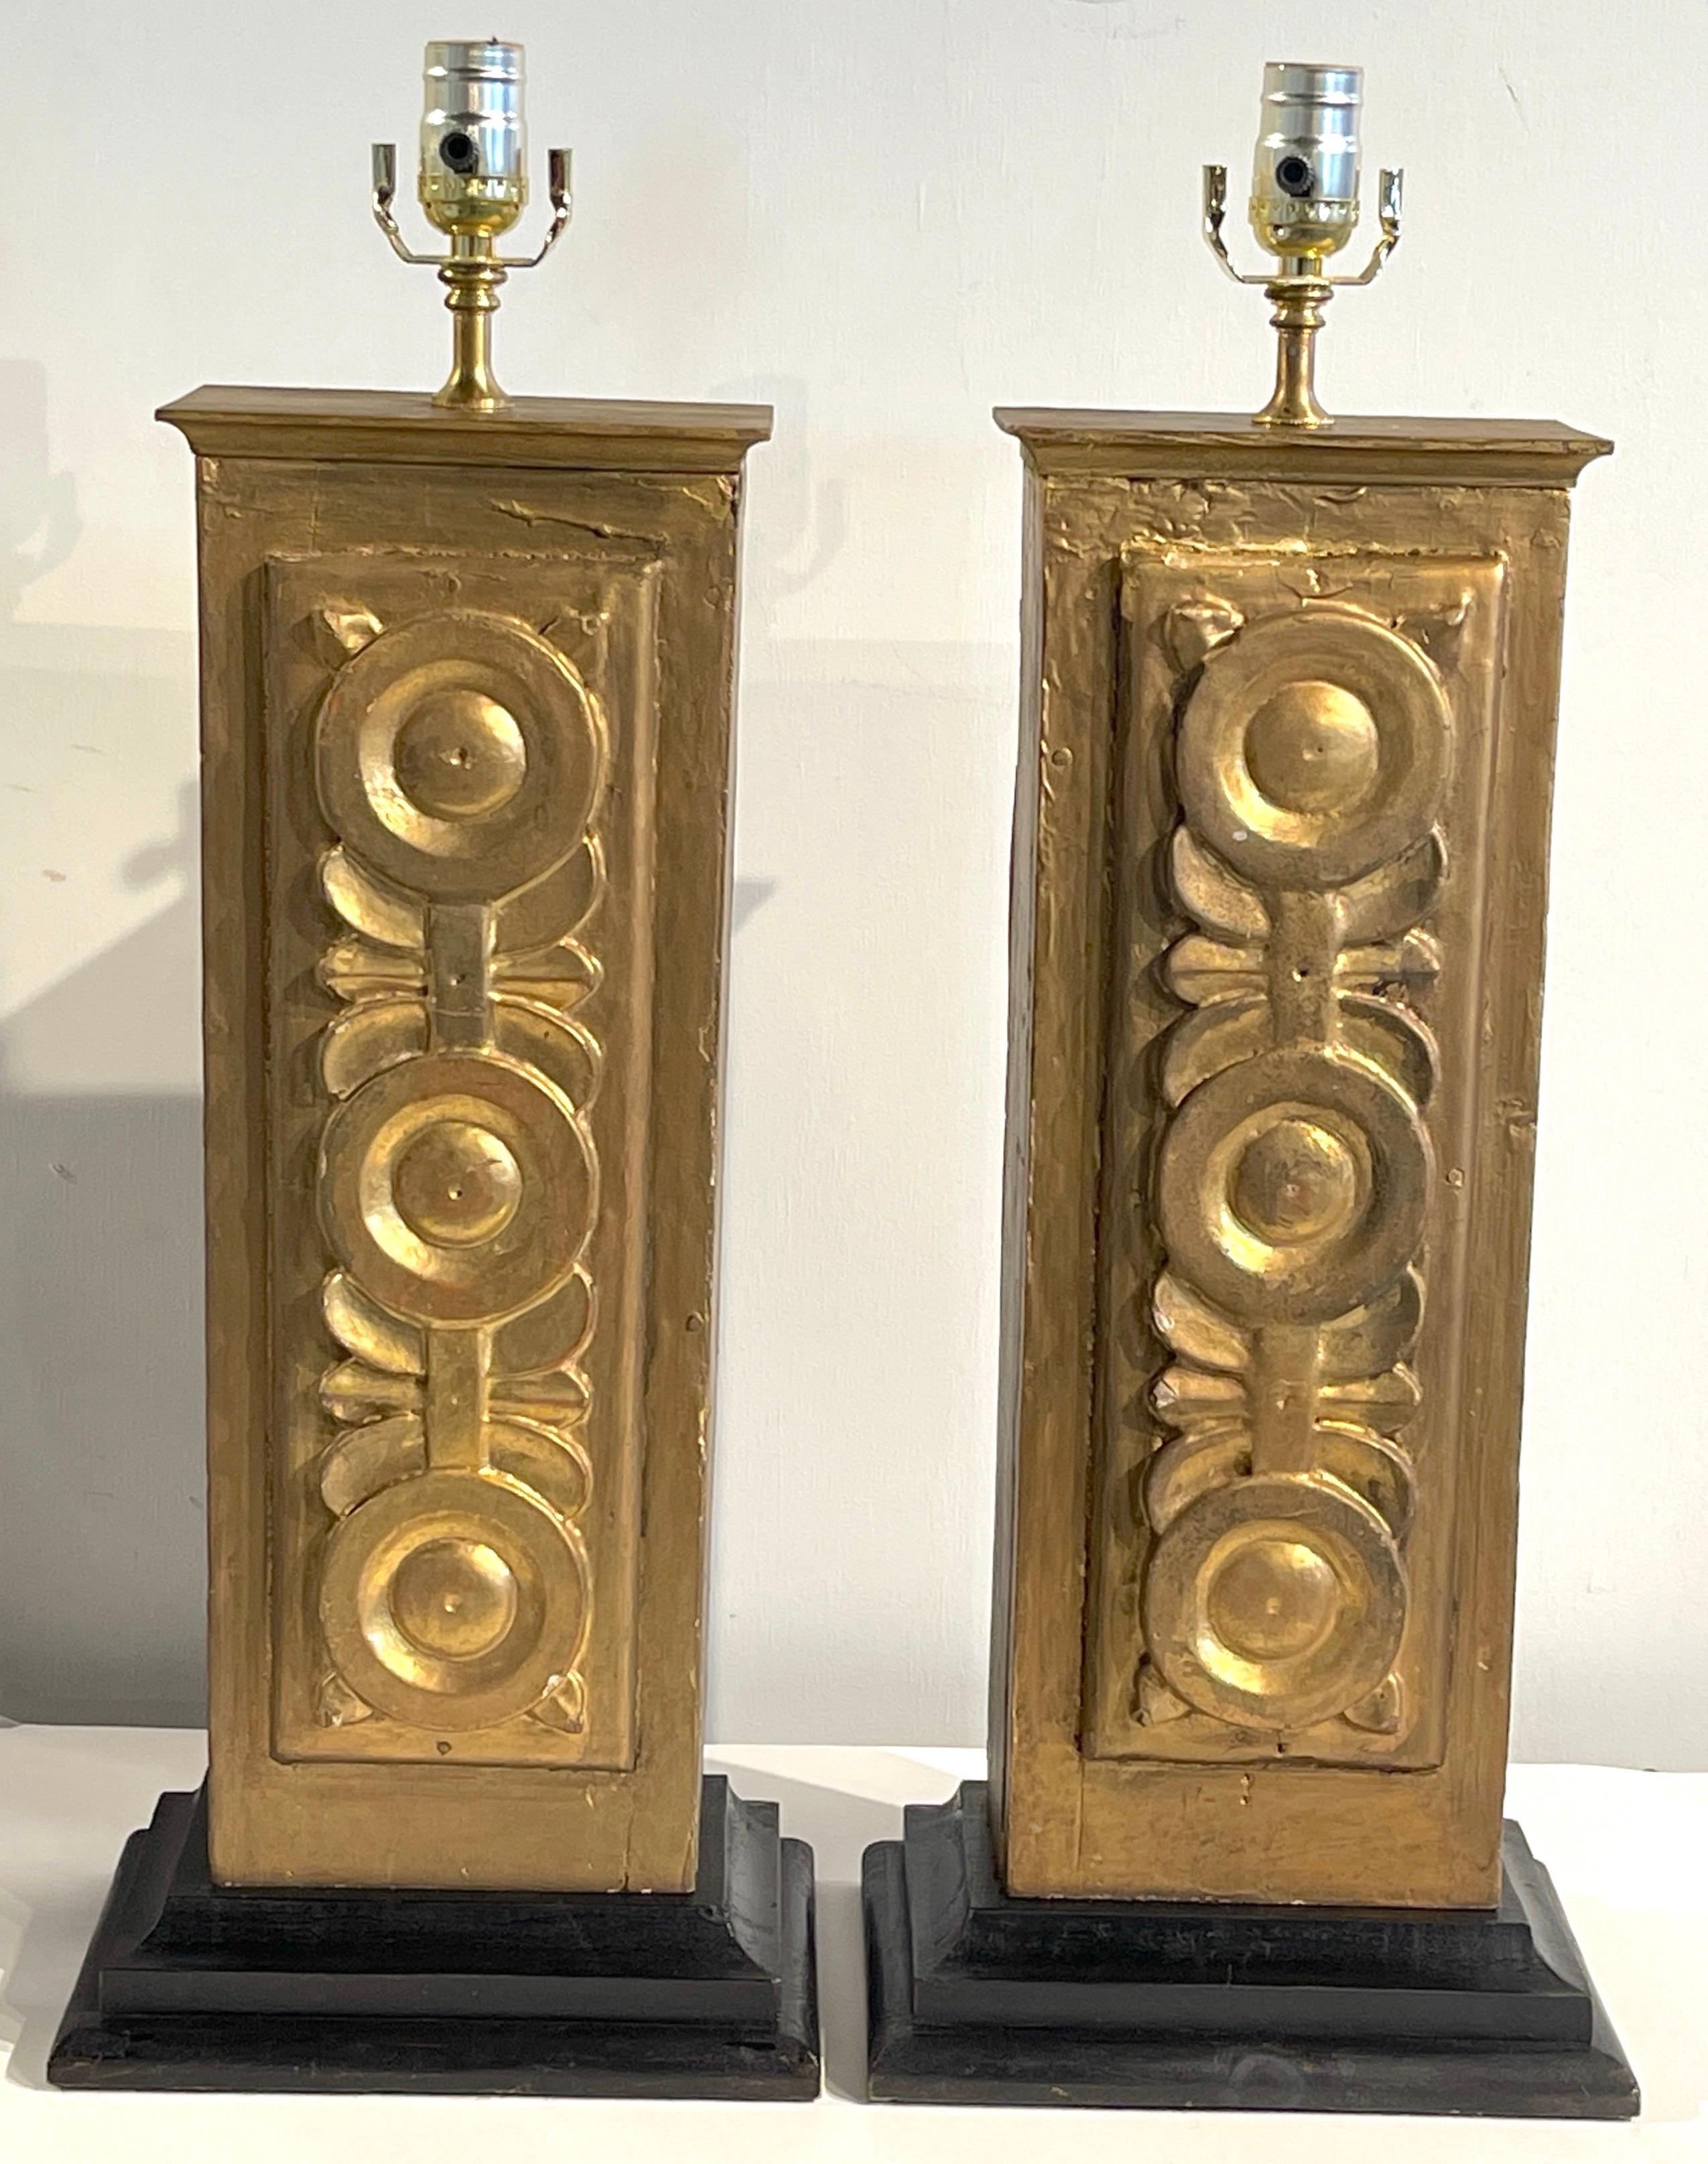 Pair of 19th century Spanish colonial giltwood columns, now as lamps 
Spain, 19th century 

Each one with a good antique patina, with three carved stylized rosettes, raised on a later ebonized wood base, newly wired.

Measurments
26-inches